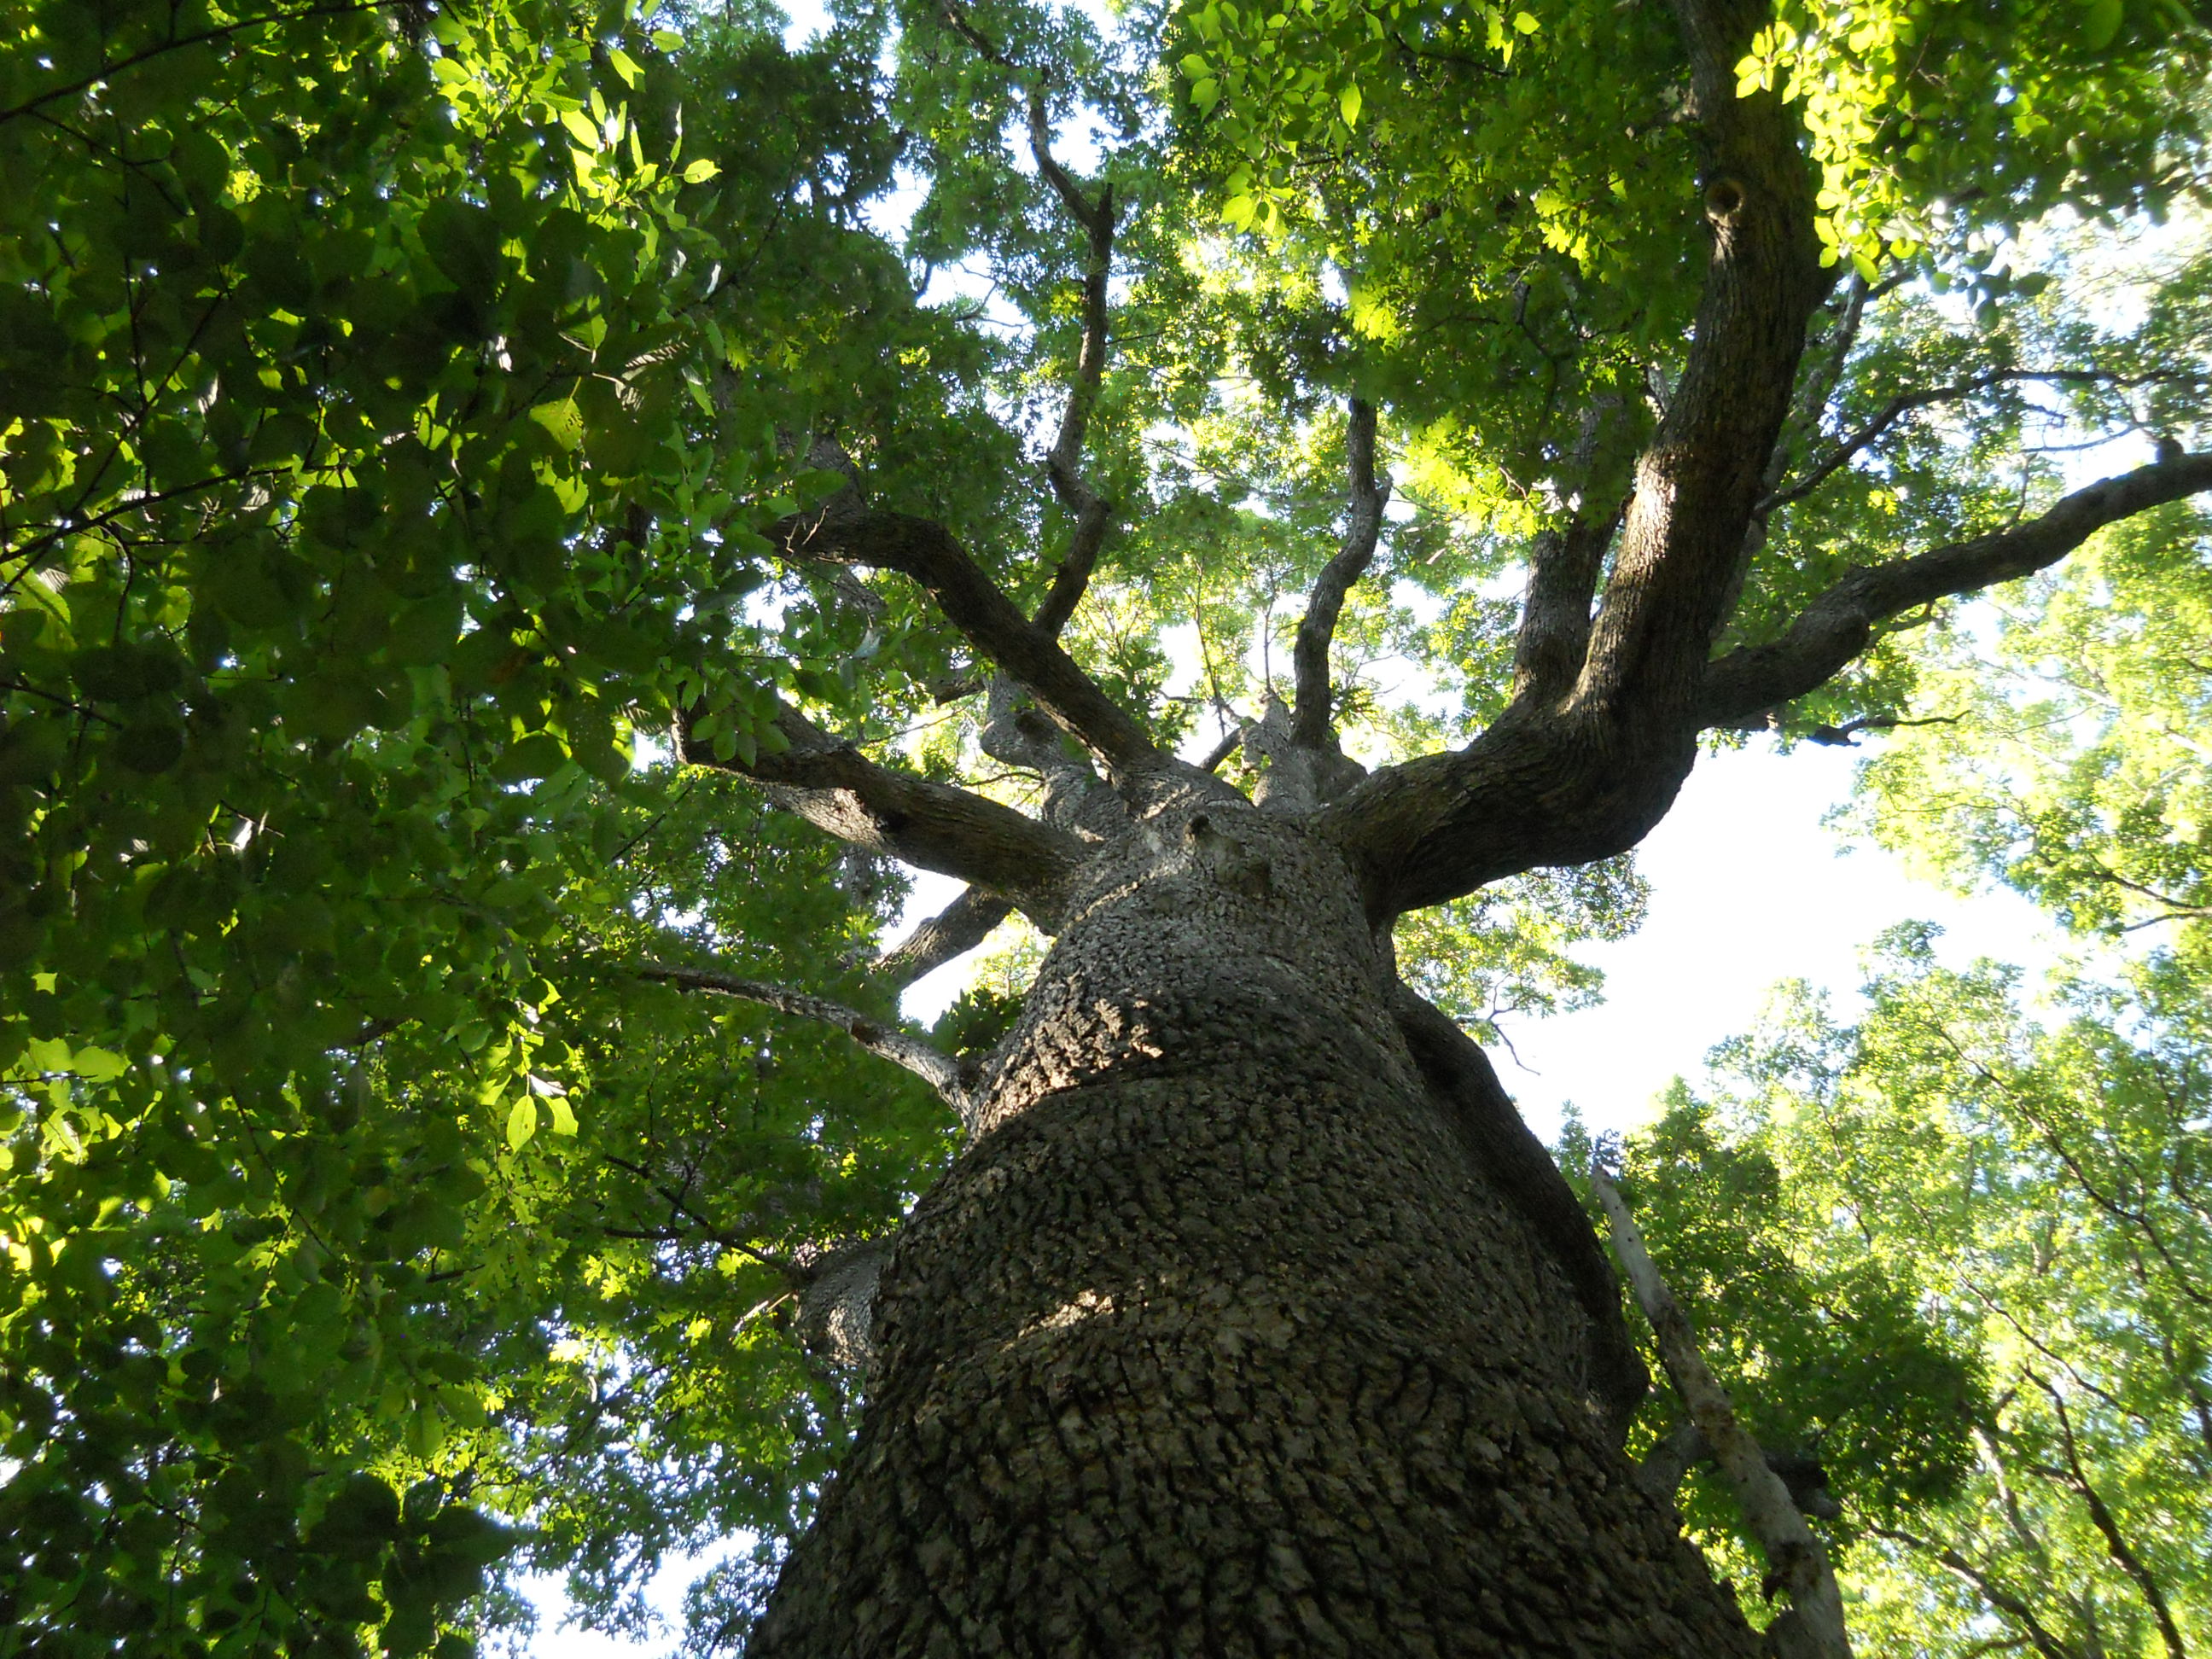 A view looking up through the canopy of a large oak tree.